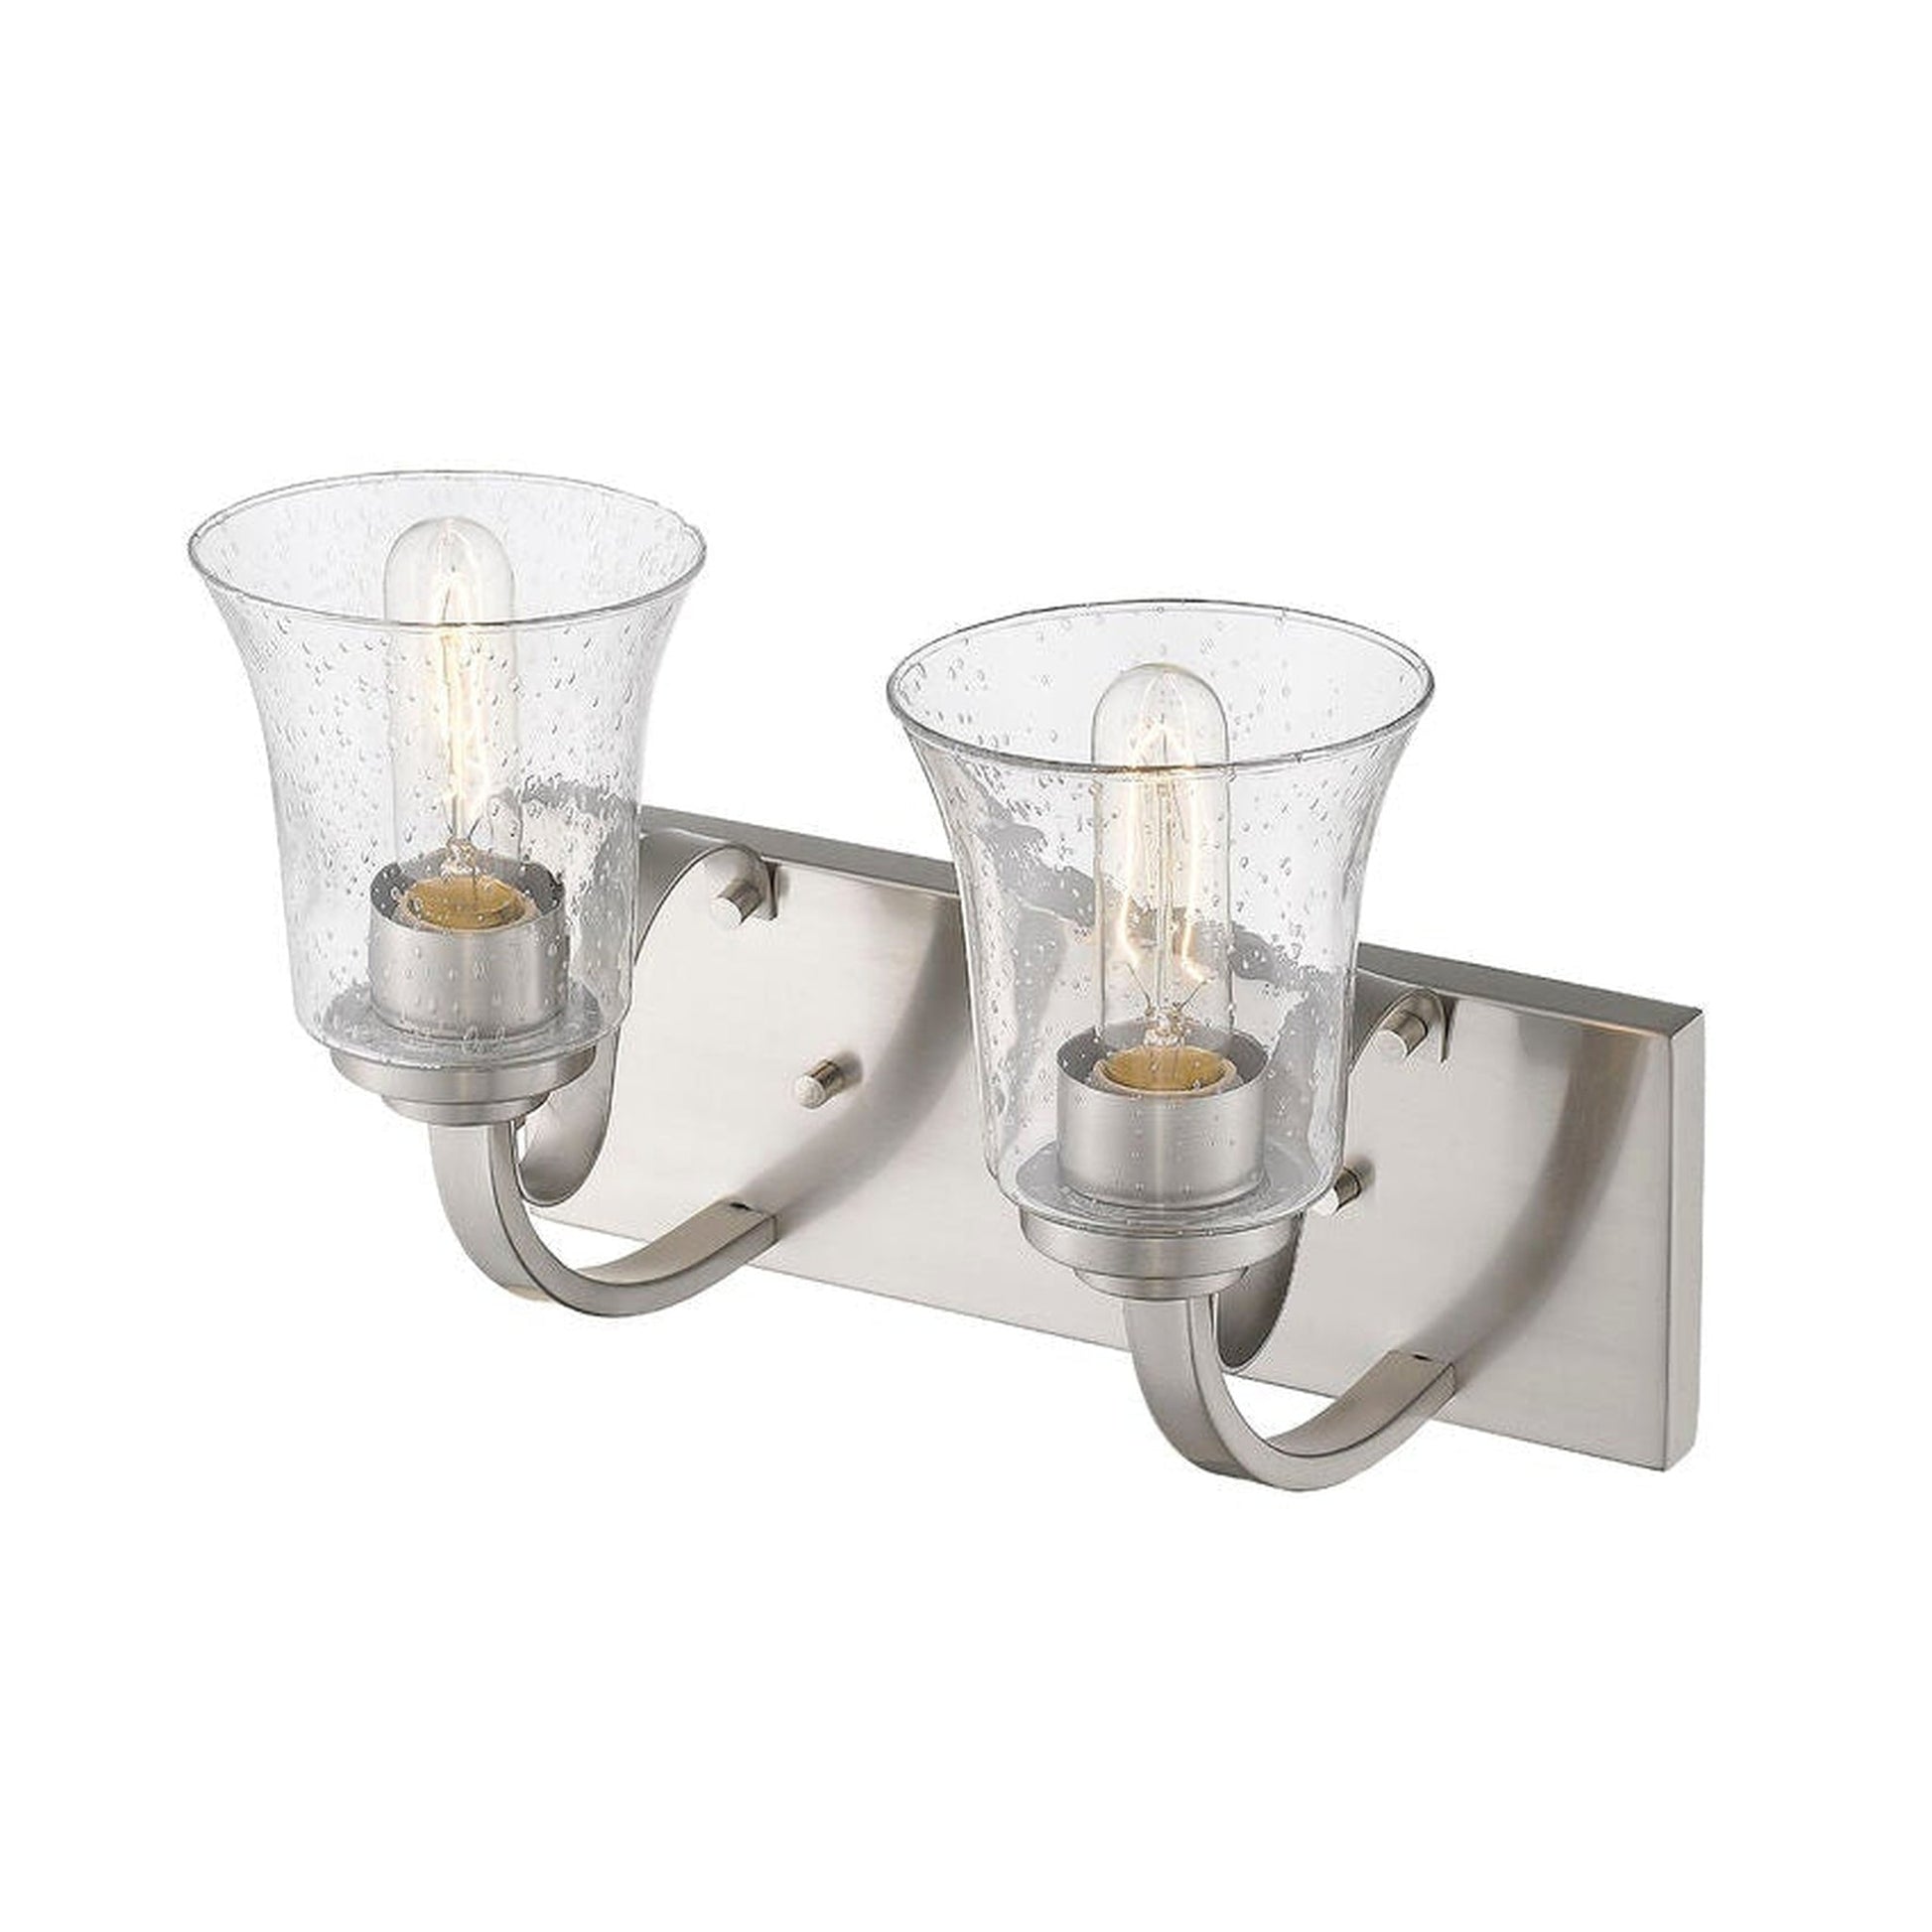 Z-Lite Halliwell 14" 2-Light Brushed Nickel Vanity Light With Clear Seedy Glass Shade